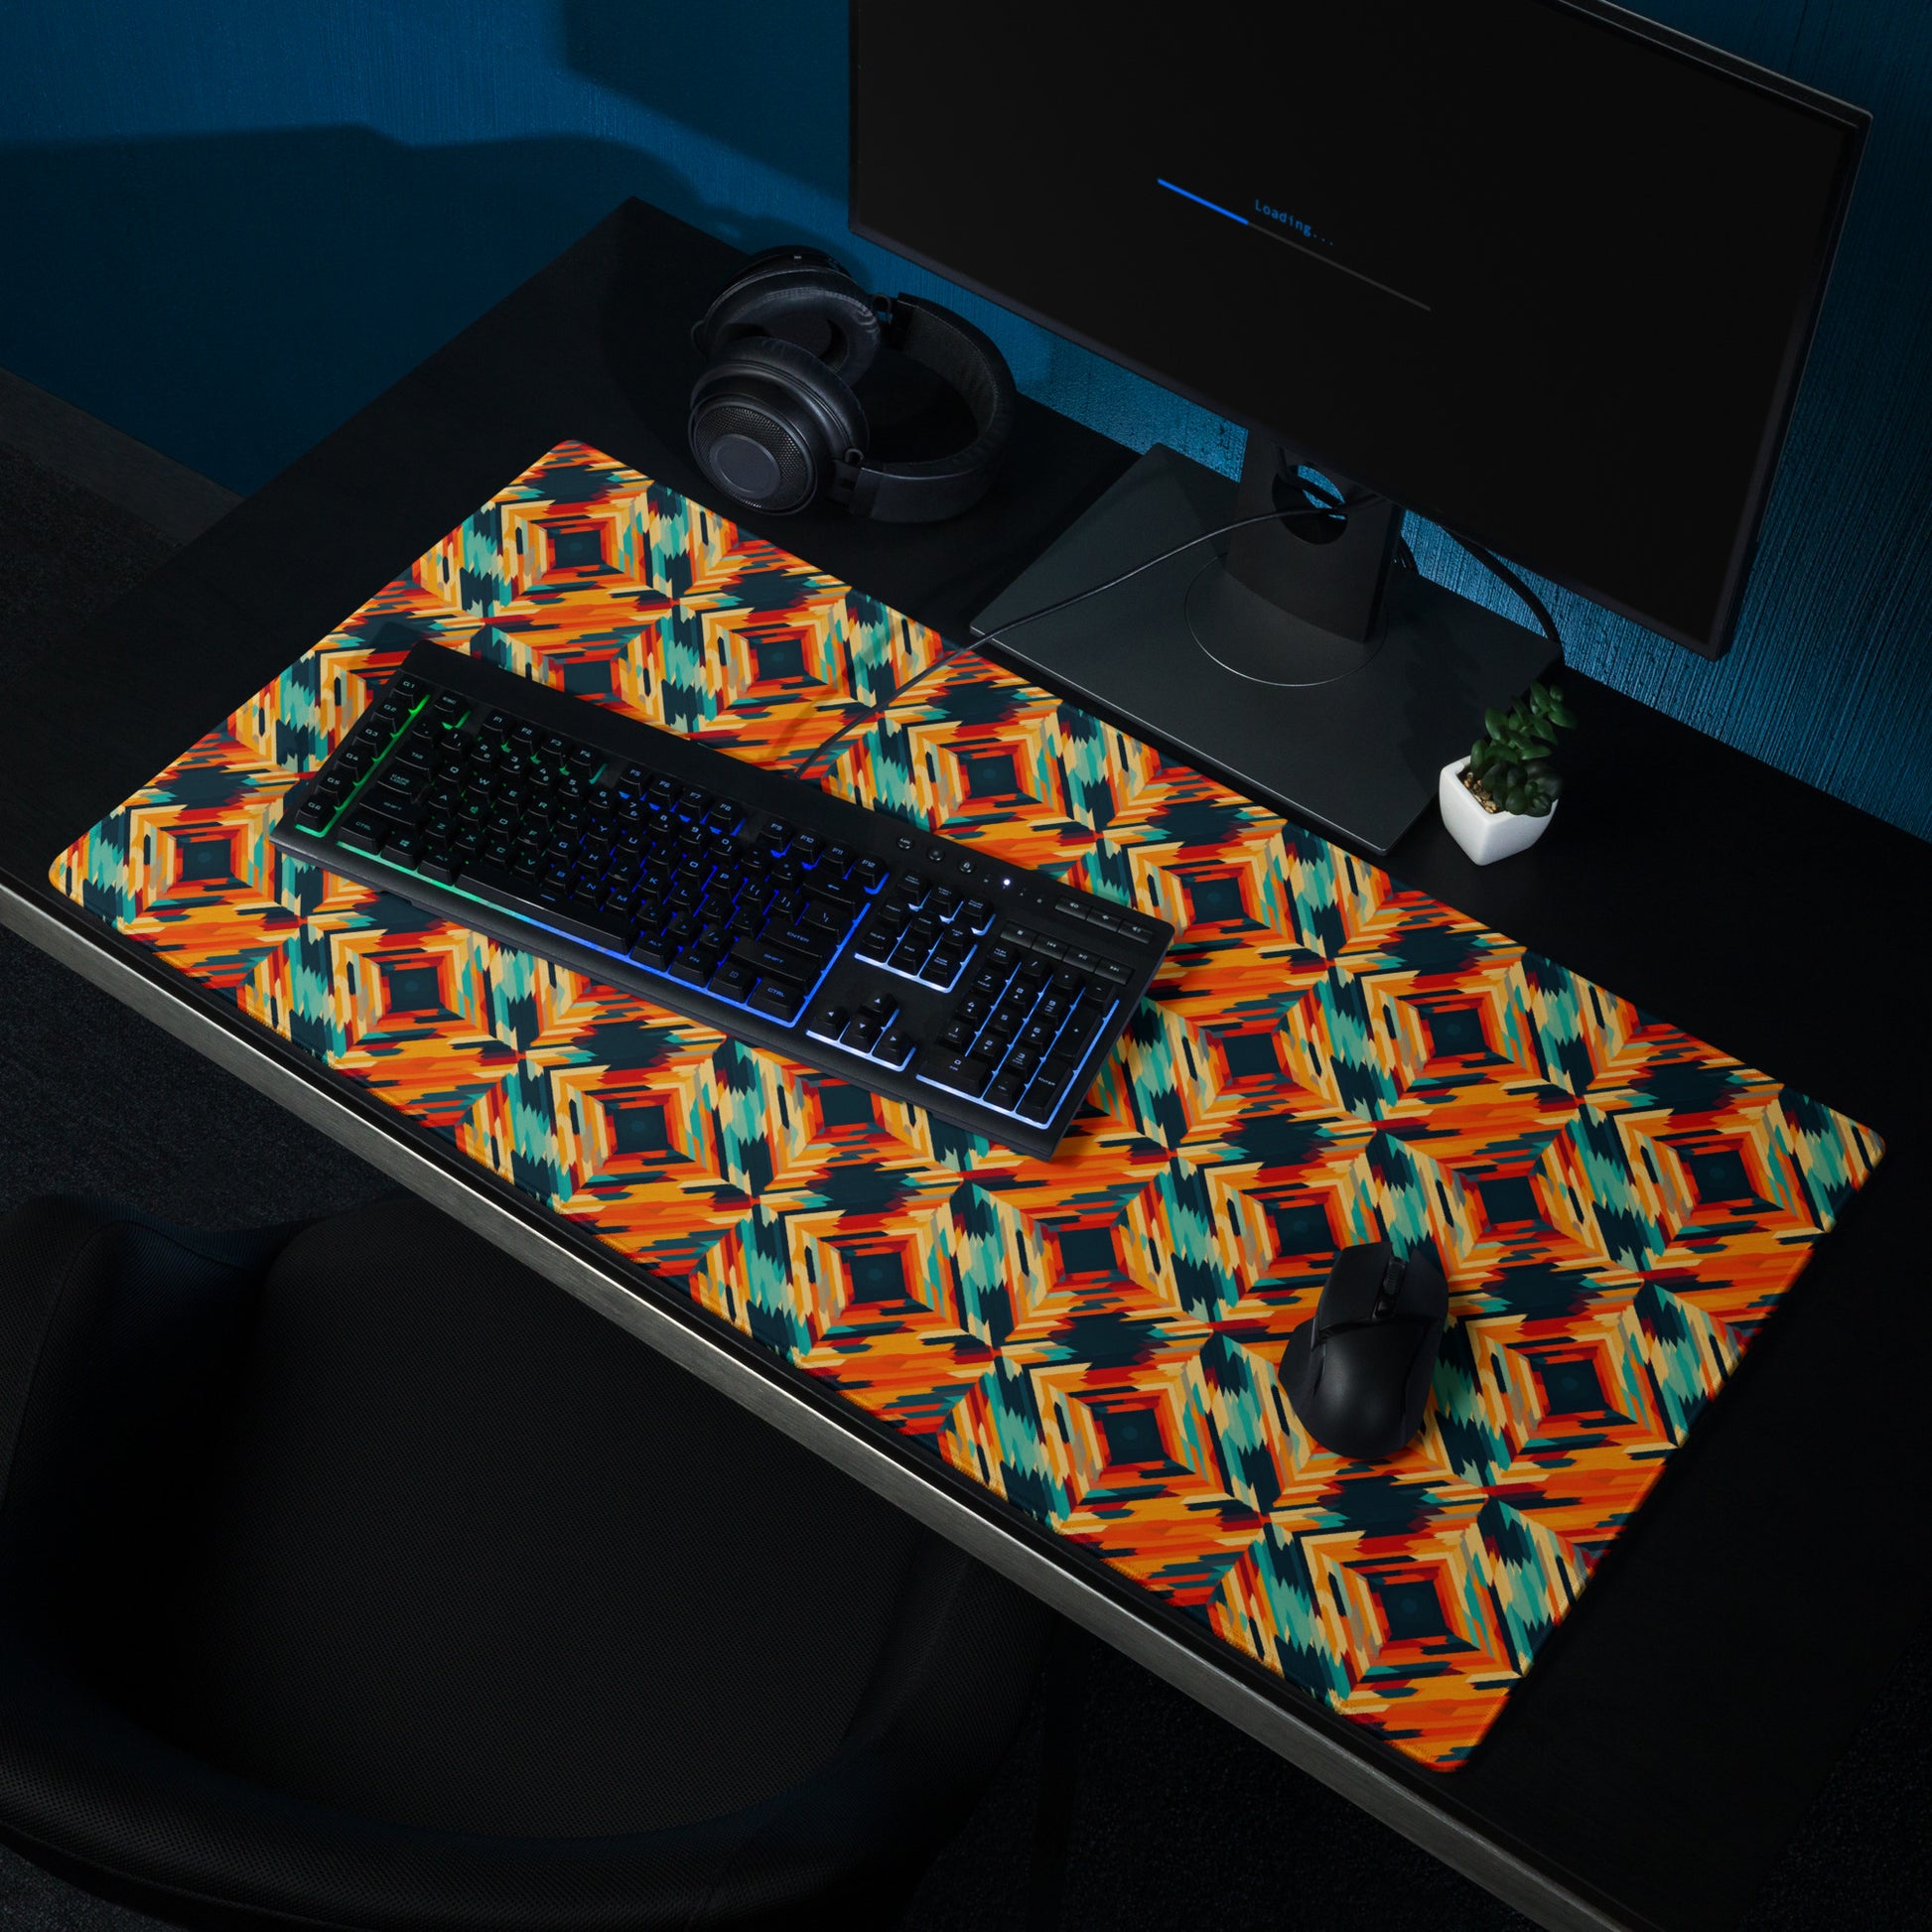 A 36" x 18" desk pad with a tiled abstract pattern on it shown on a desk setup. Orange in color.